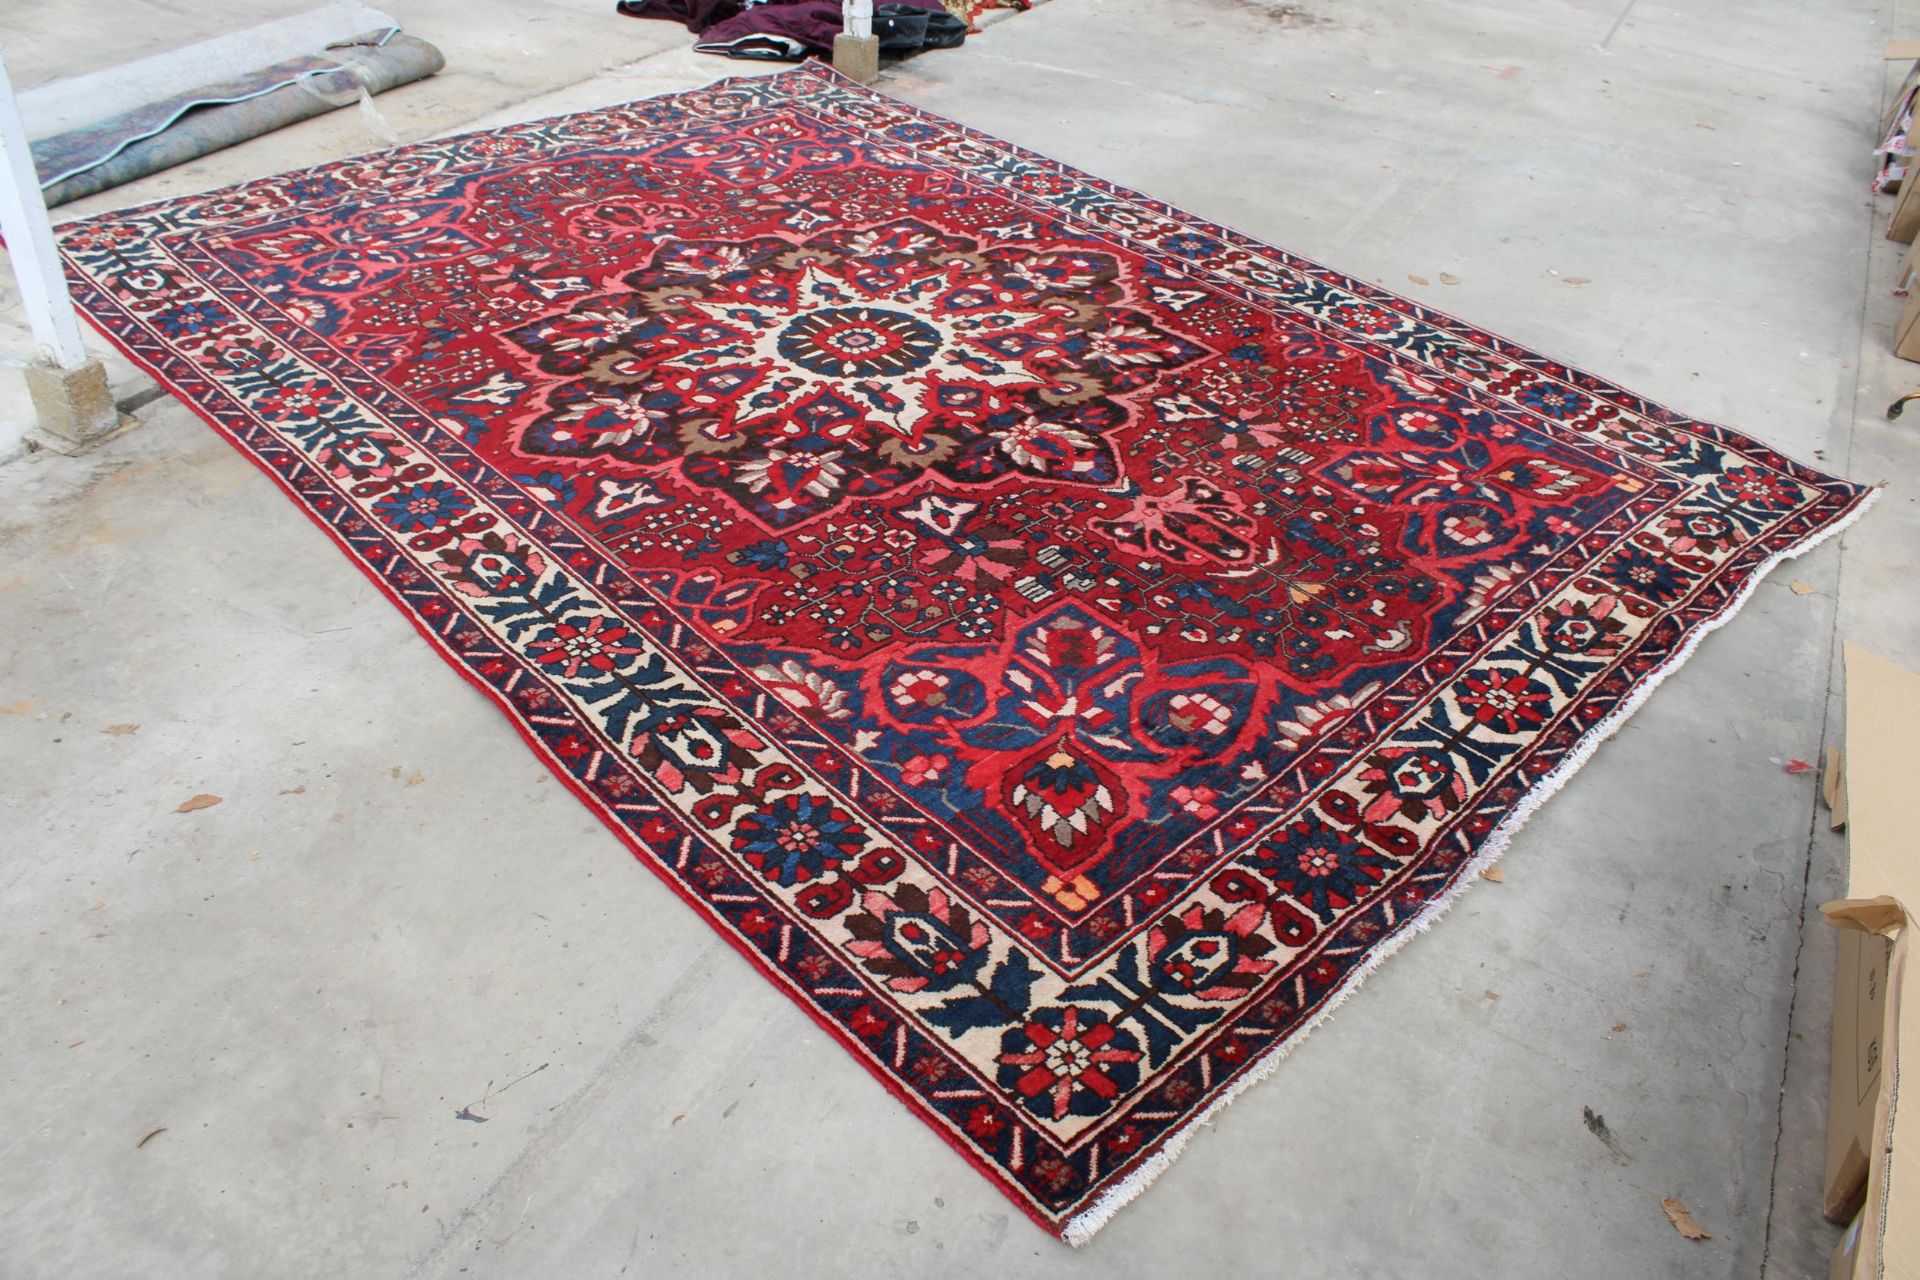 A LARGE RED PATTERNED FRINGED RUG - Image 2 of 5